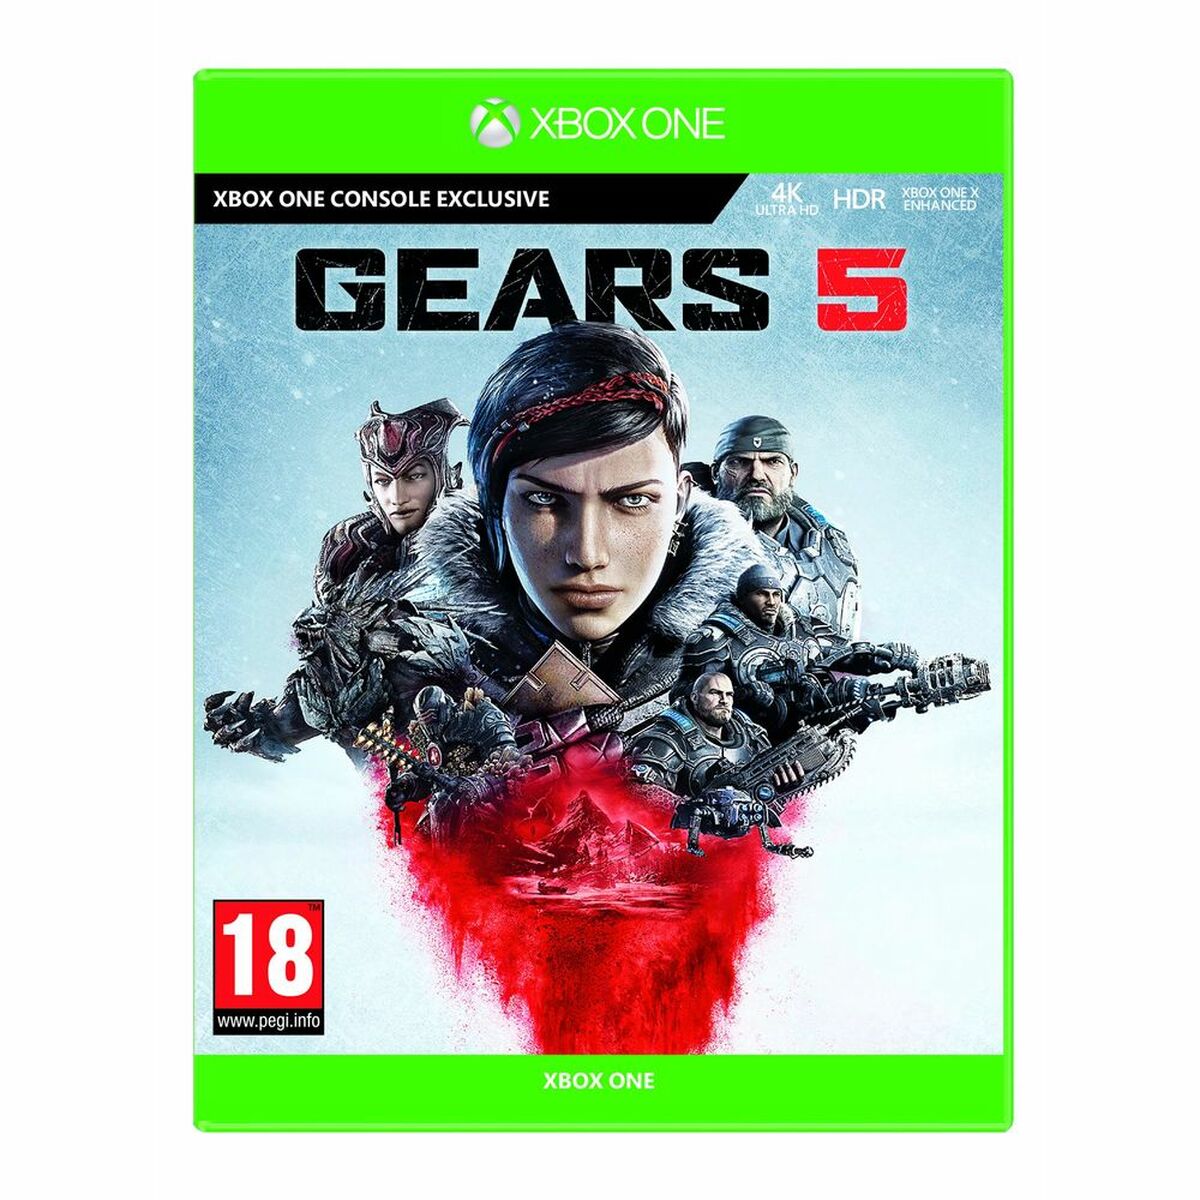 Xbox One Video Game Microsoft Gears 5, Microsoft, Electronics, Plug & Play Games Consoles, xbox-one-video-game-microsoft-gears-5, :XBox, Brand_Microsoft, category-reference-2609, category-reference-2904, category-reference-2913, category-reference-t-19271, category-reference-t-19293, category-reference-t-19653, category-reference-t-19672, cinema and television, Condition_NEW, entertainment, gaming, juegos para adultos, Price_50 - 100, RiotNook